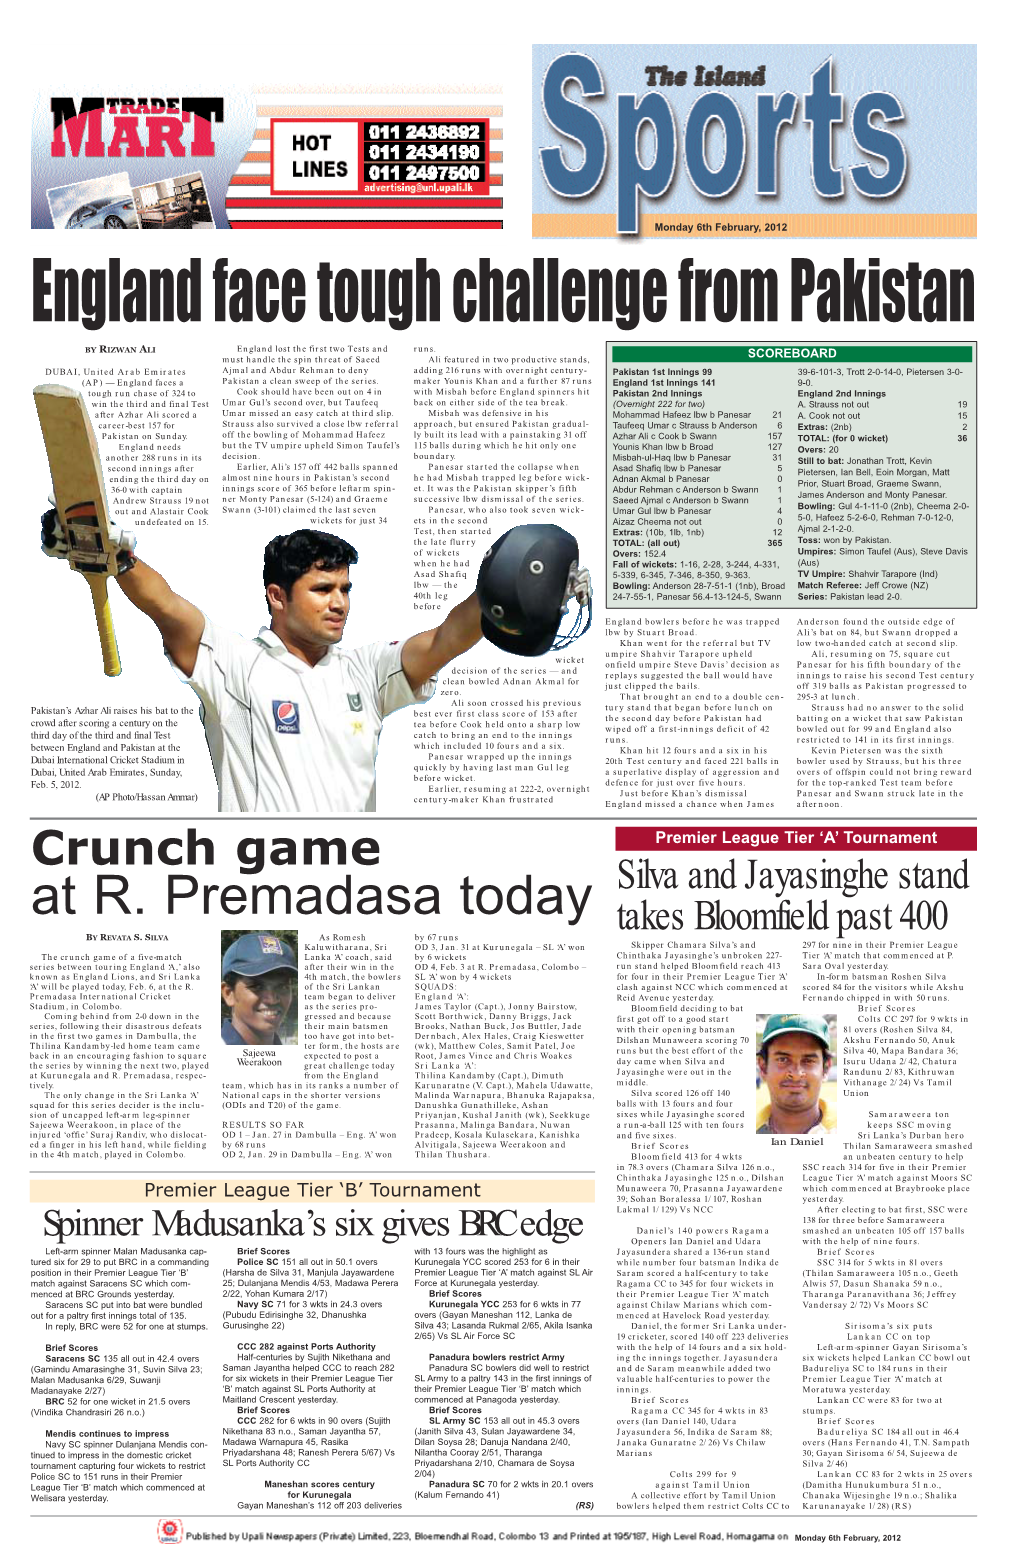 At R. Premadasa Today Takes Bloomfield Past 400 by REVATA S